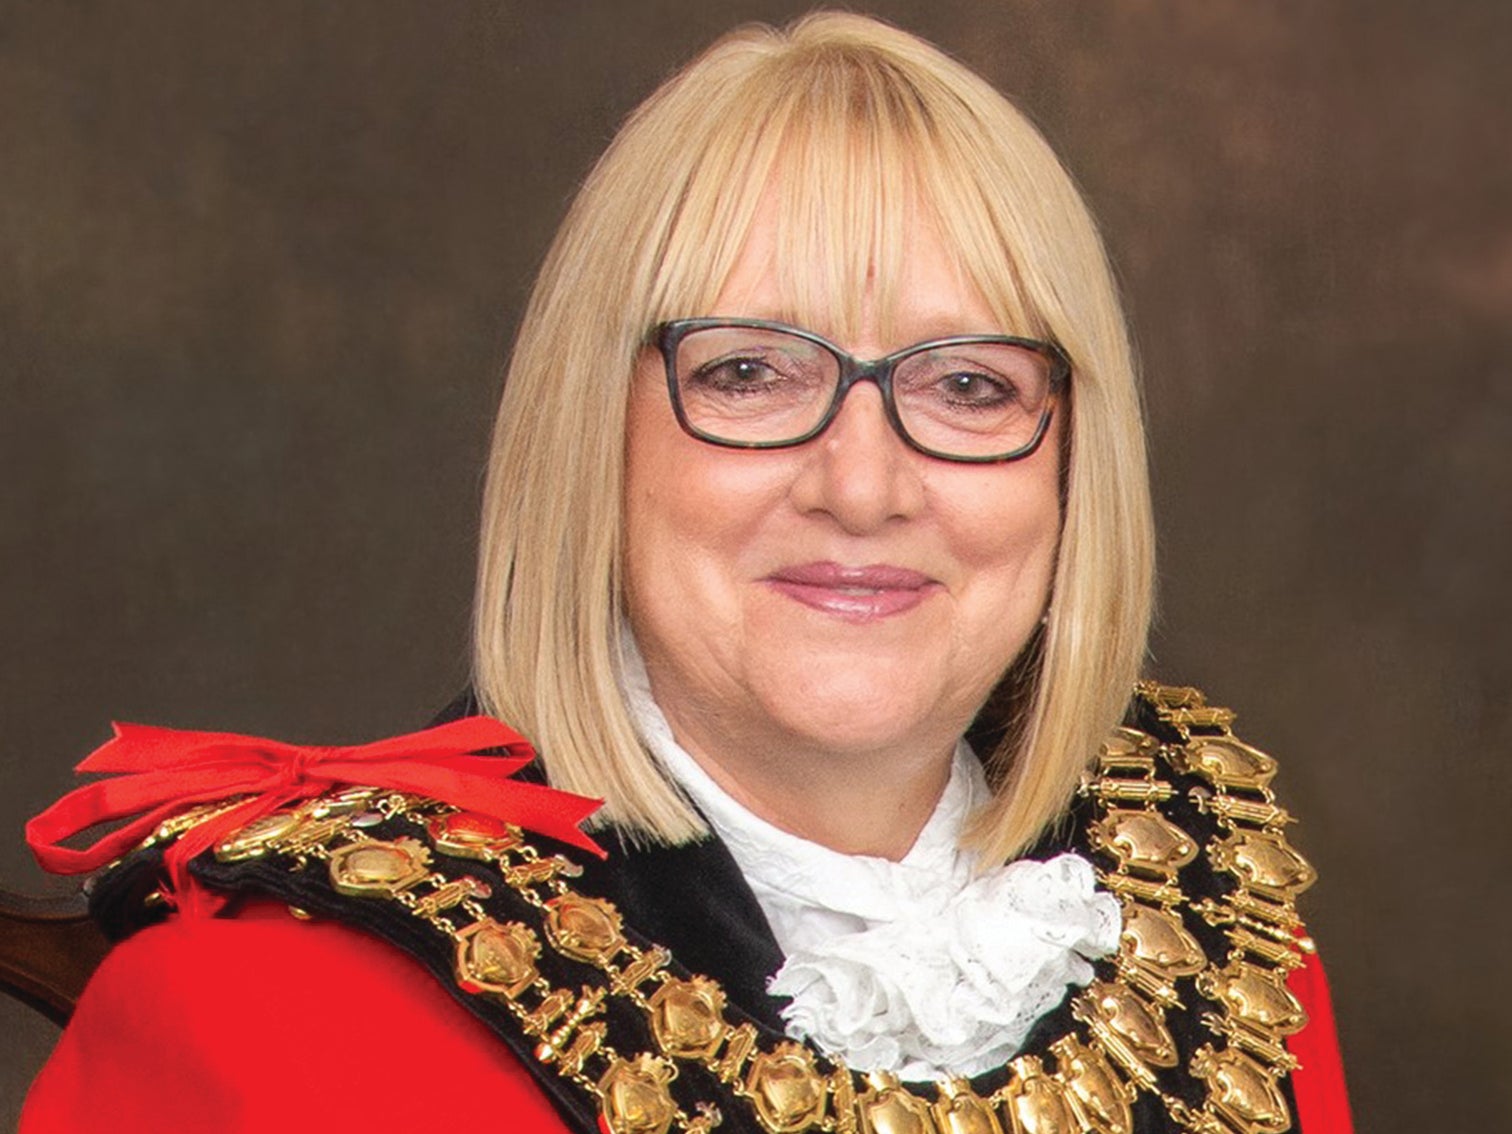 Laura Booth, the mayor of Stockport, faced abuse online over her footwear